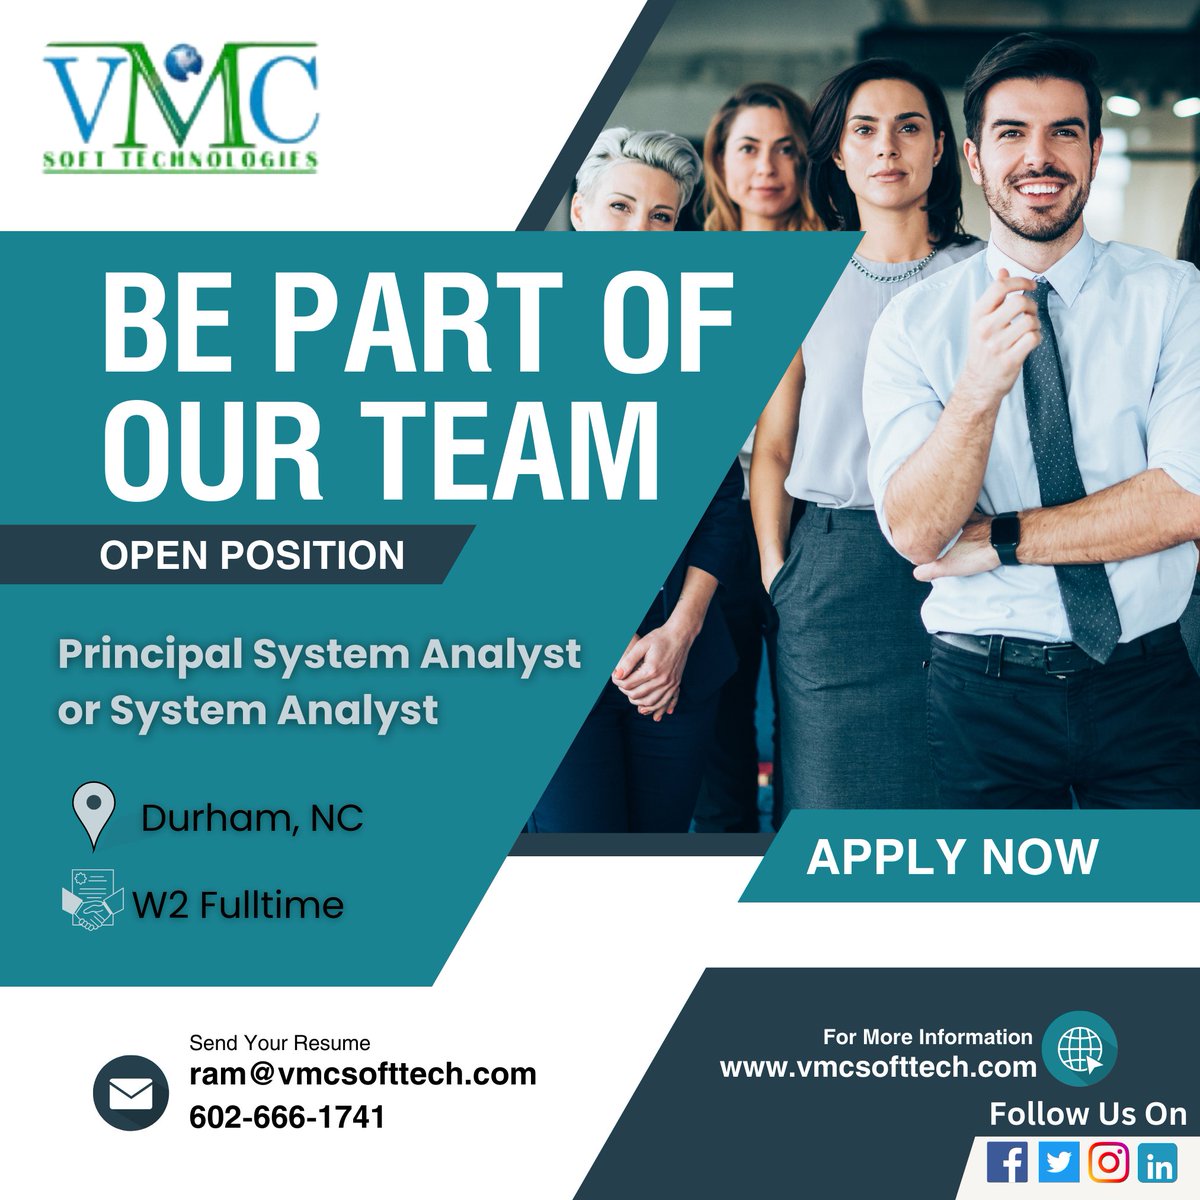 VMC Soft Technologies is looking for System Analyst in Durham, NC Title: System Analyst Location: Durham, NC Contract: W2 Fulltime For more details: ram@vmcsofttech.com/ 602-666-1741 Apply Now At: vmcsofttech.com/careers/ #businessanalysis #businessanalyst #business #agile